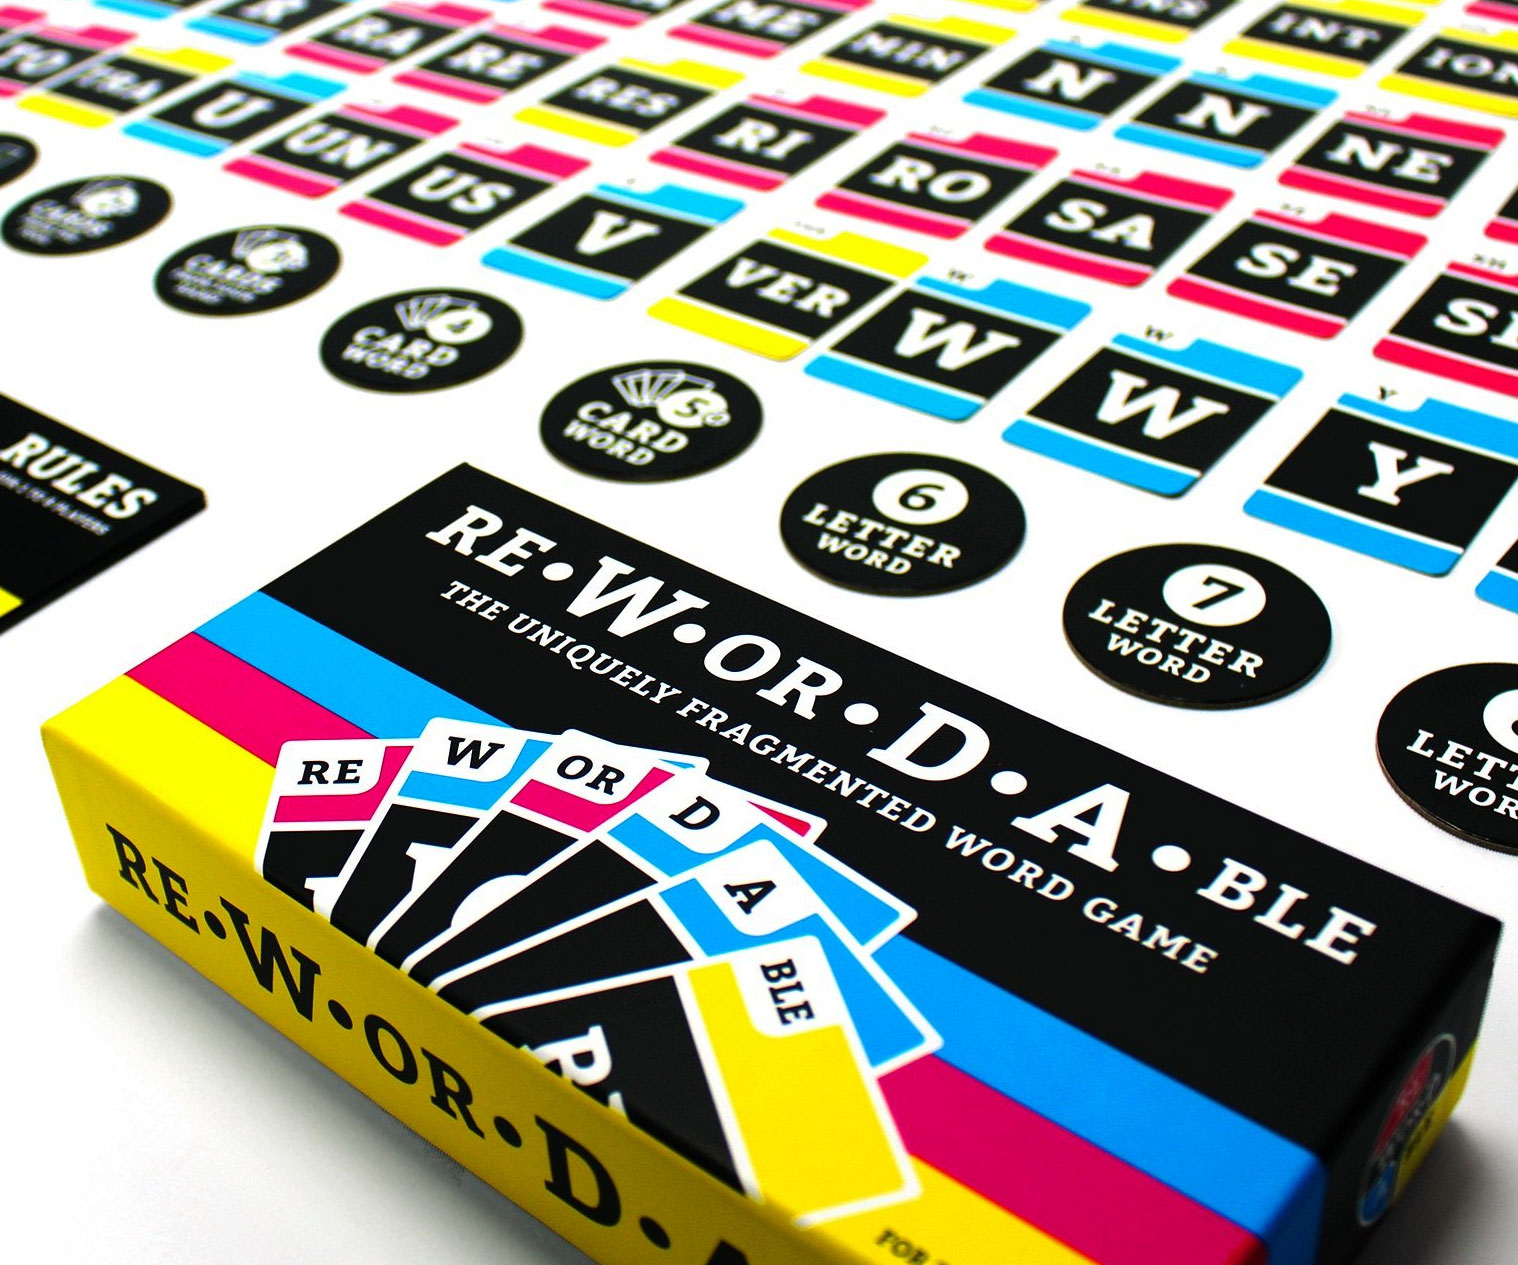 Rewordable Card Game